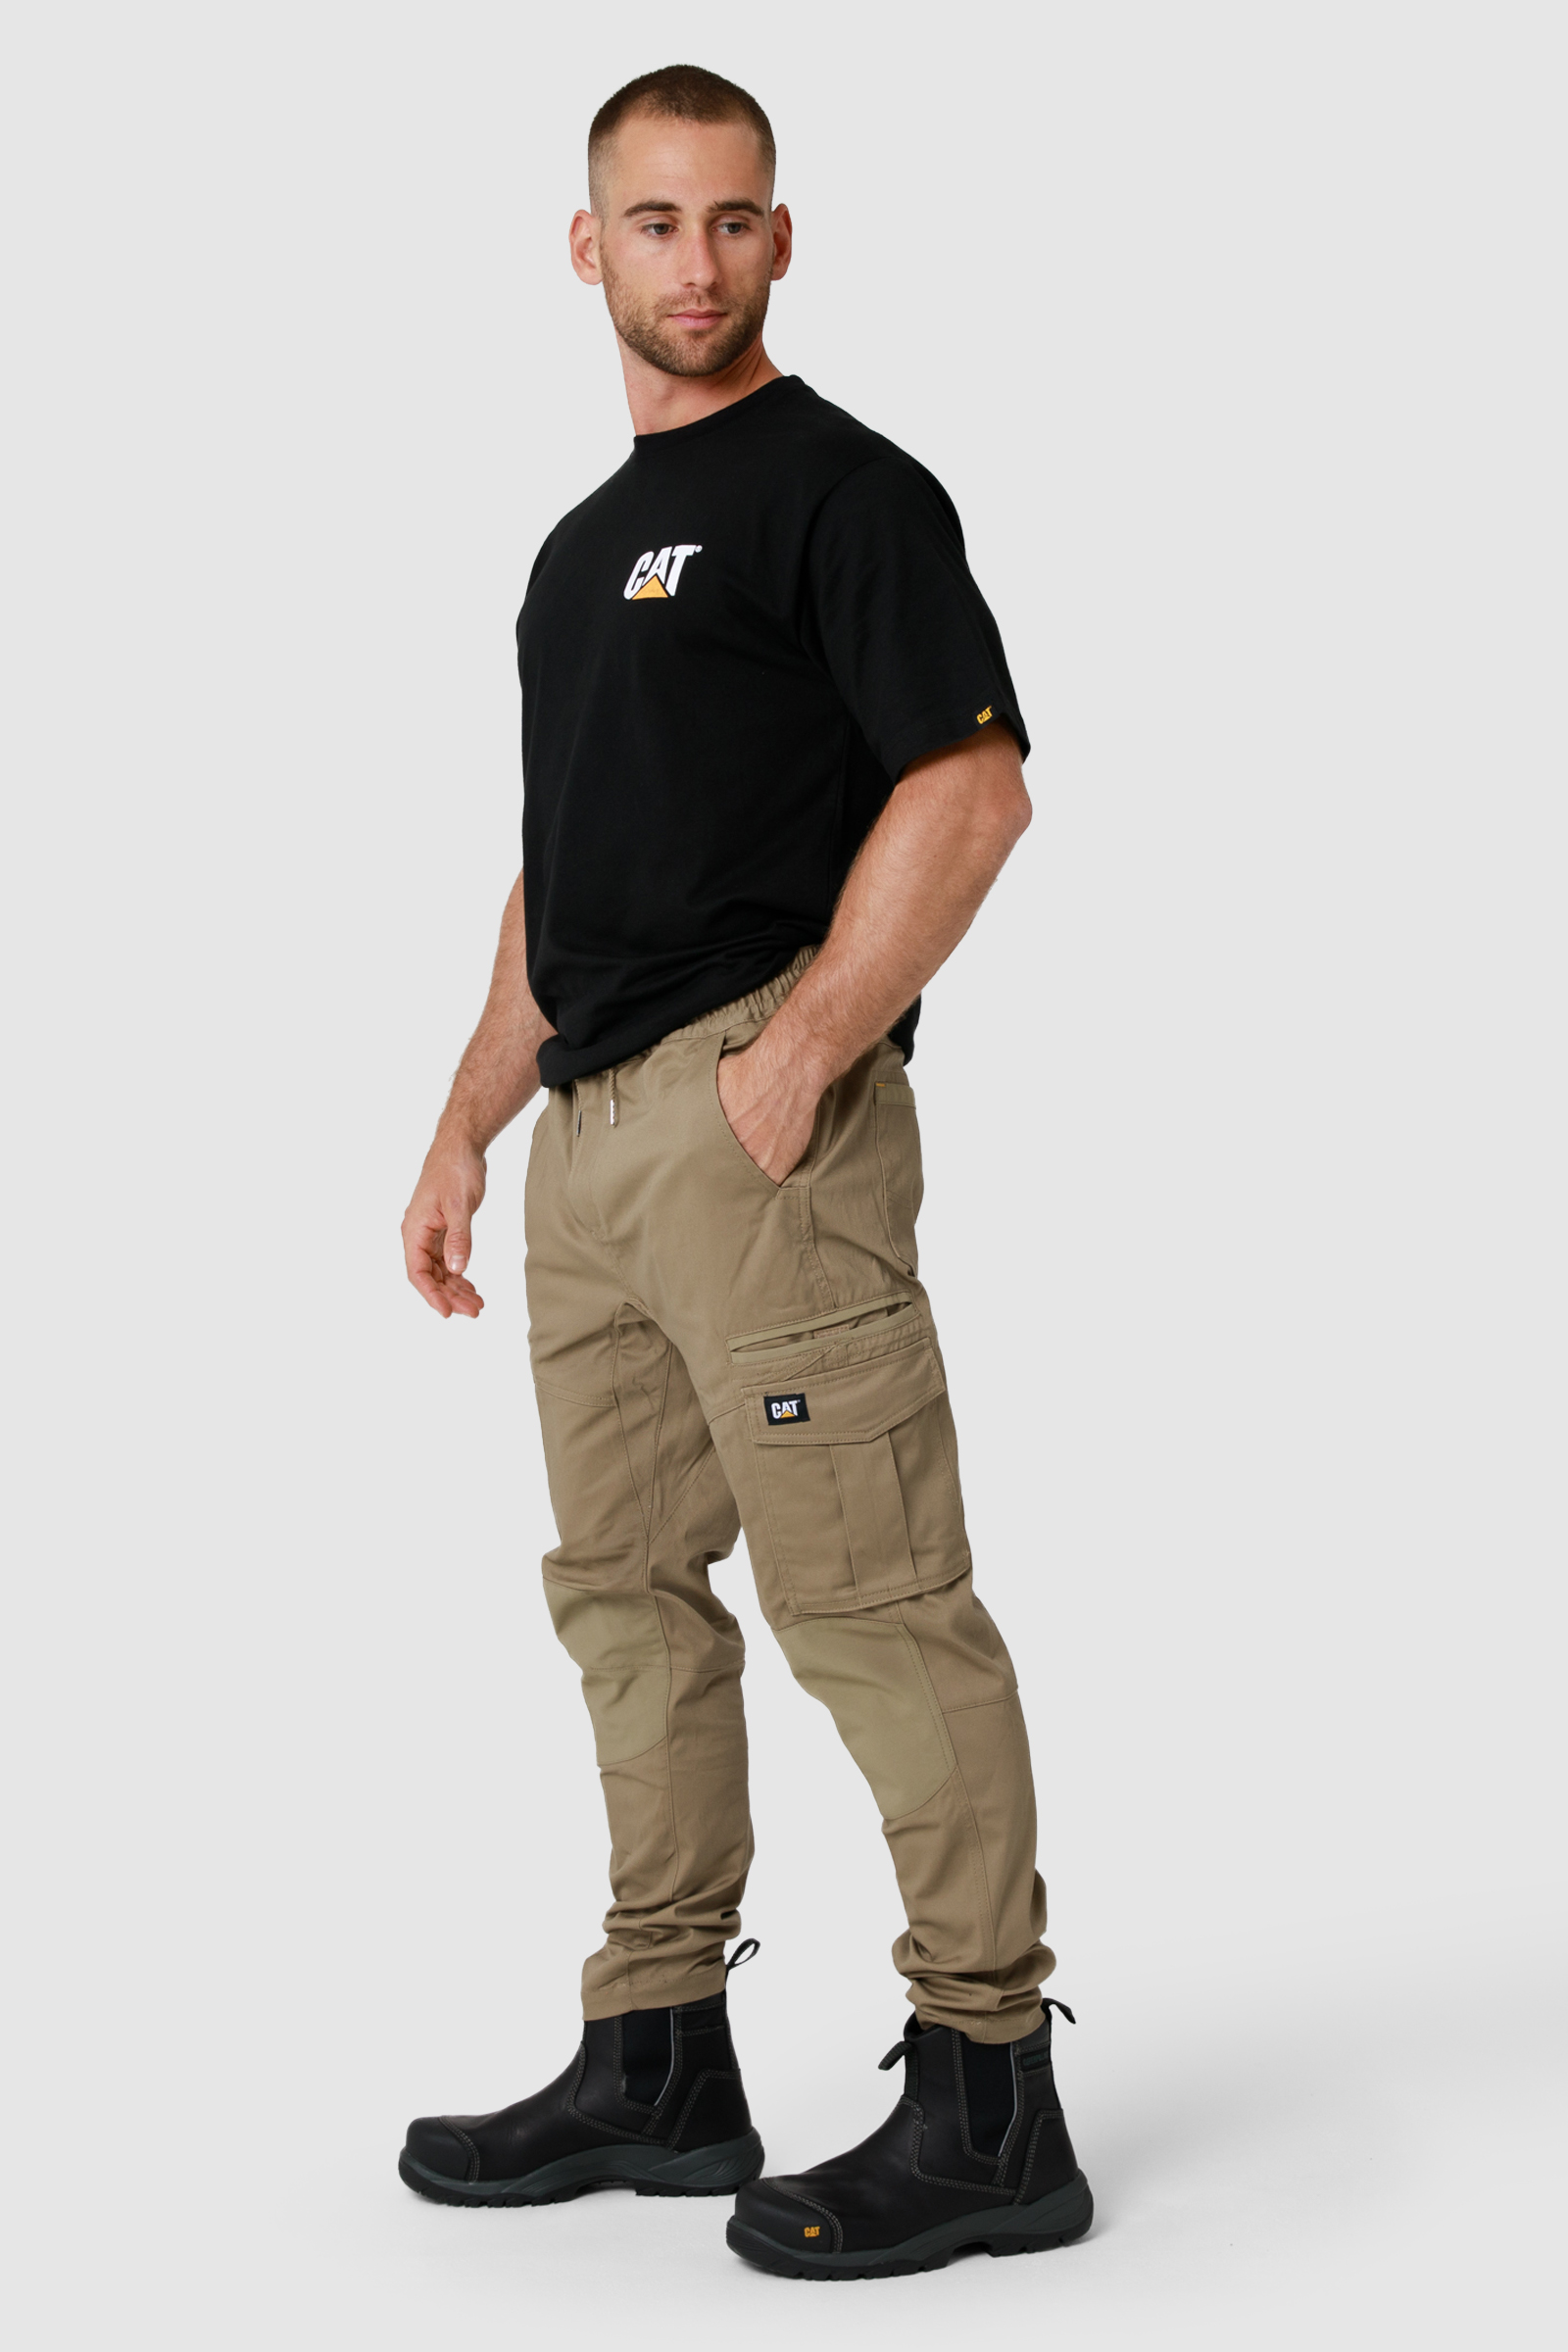 Pants  HiVis Chainsaw Protection Class 1  PROTOSNZ